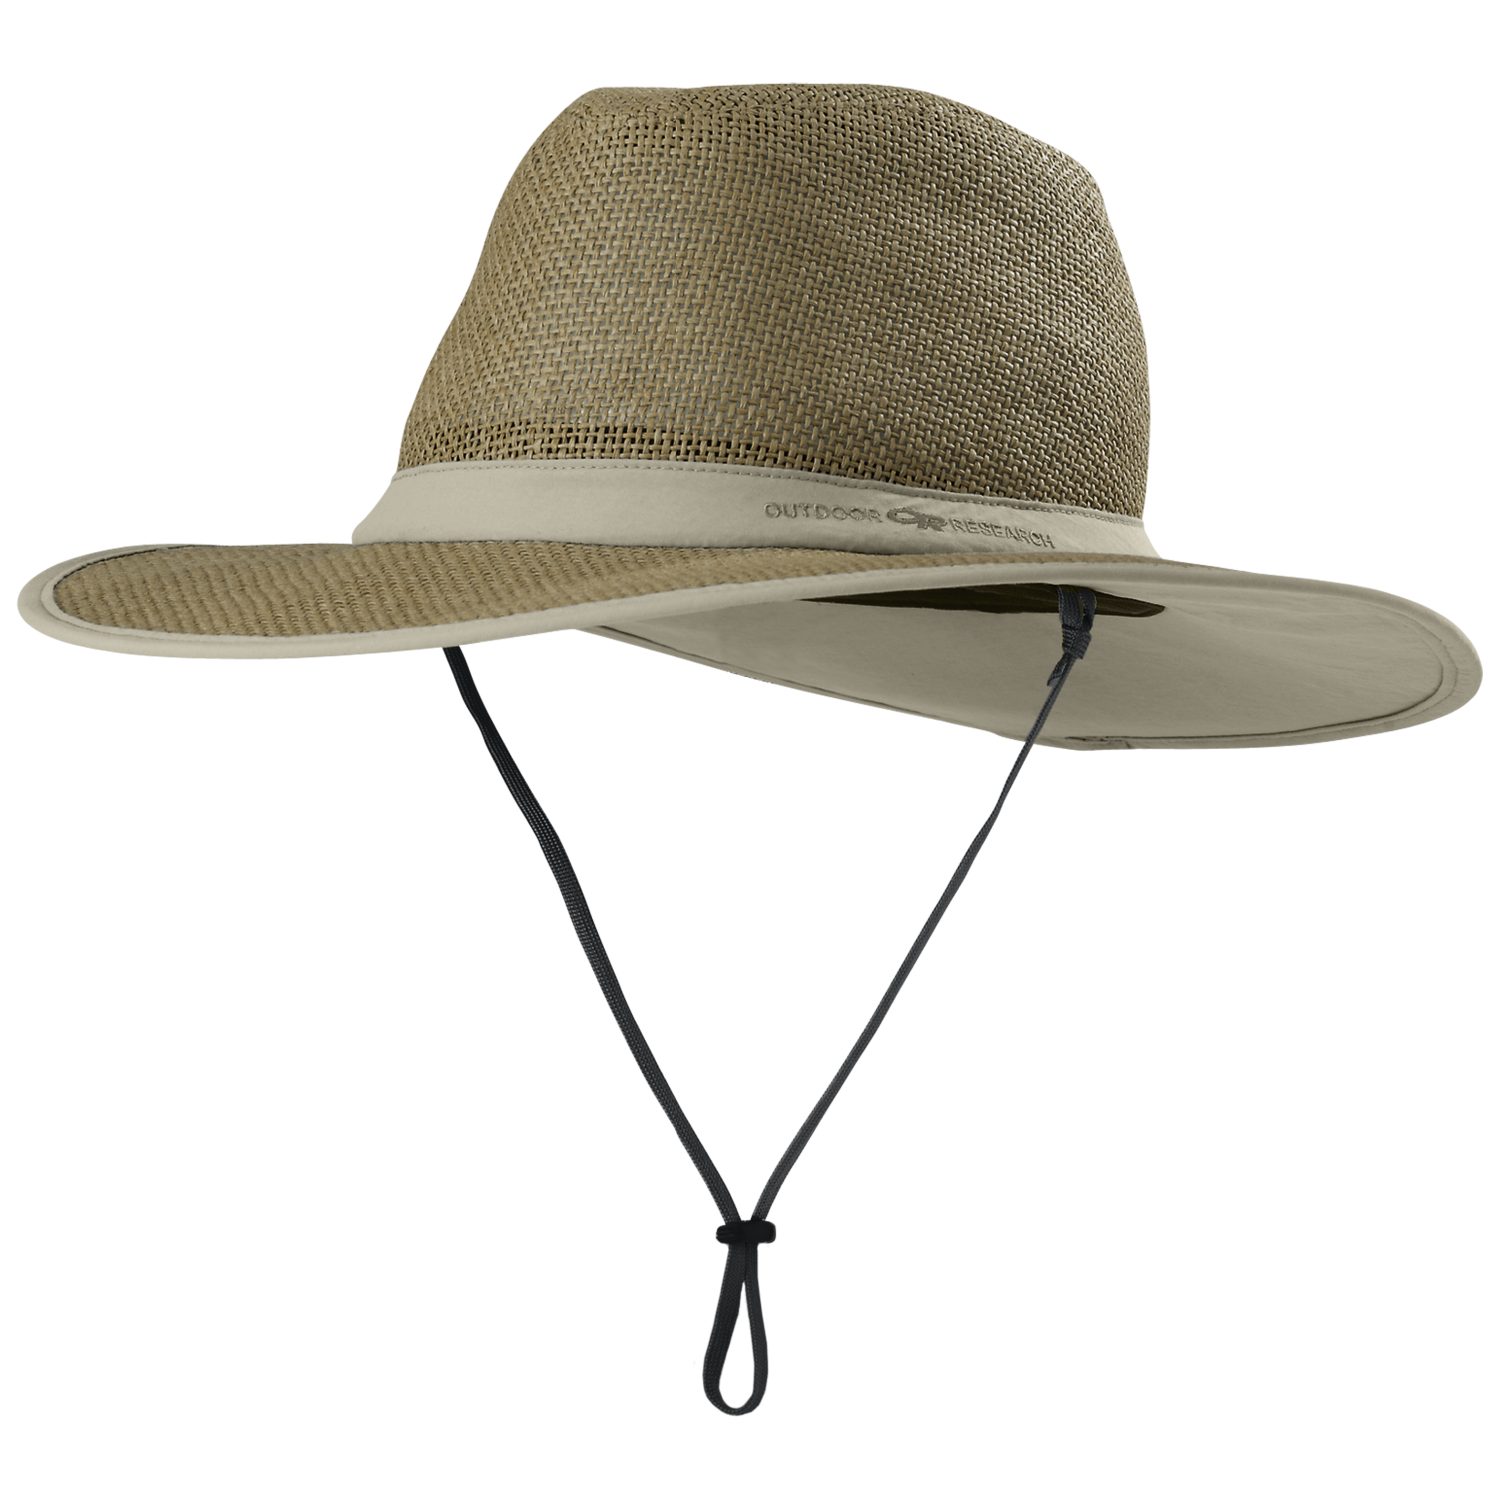 Outdoorhut Outdoor Research Outdoor Hat Brim Papyrus Sun Research